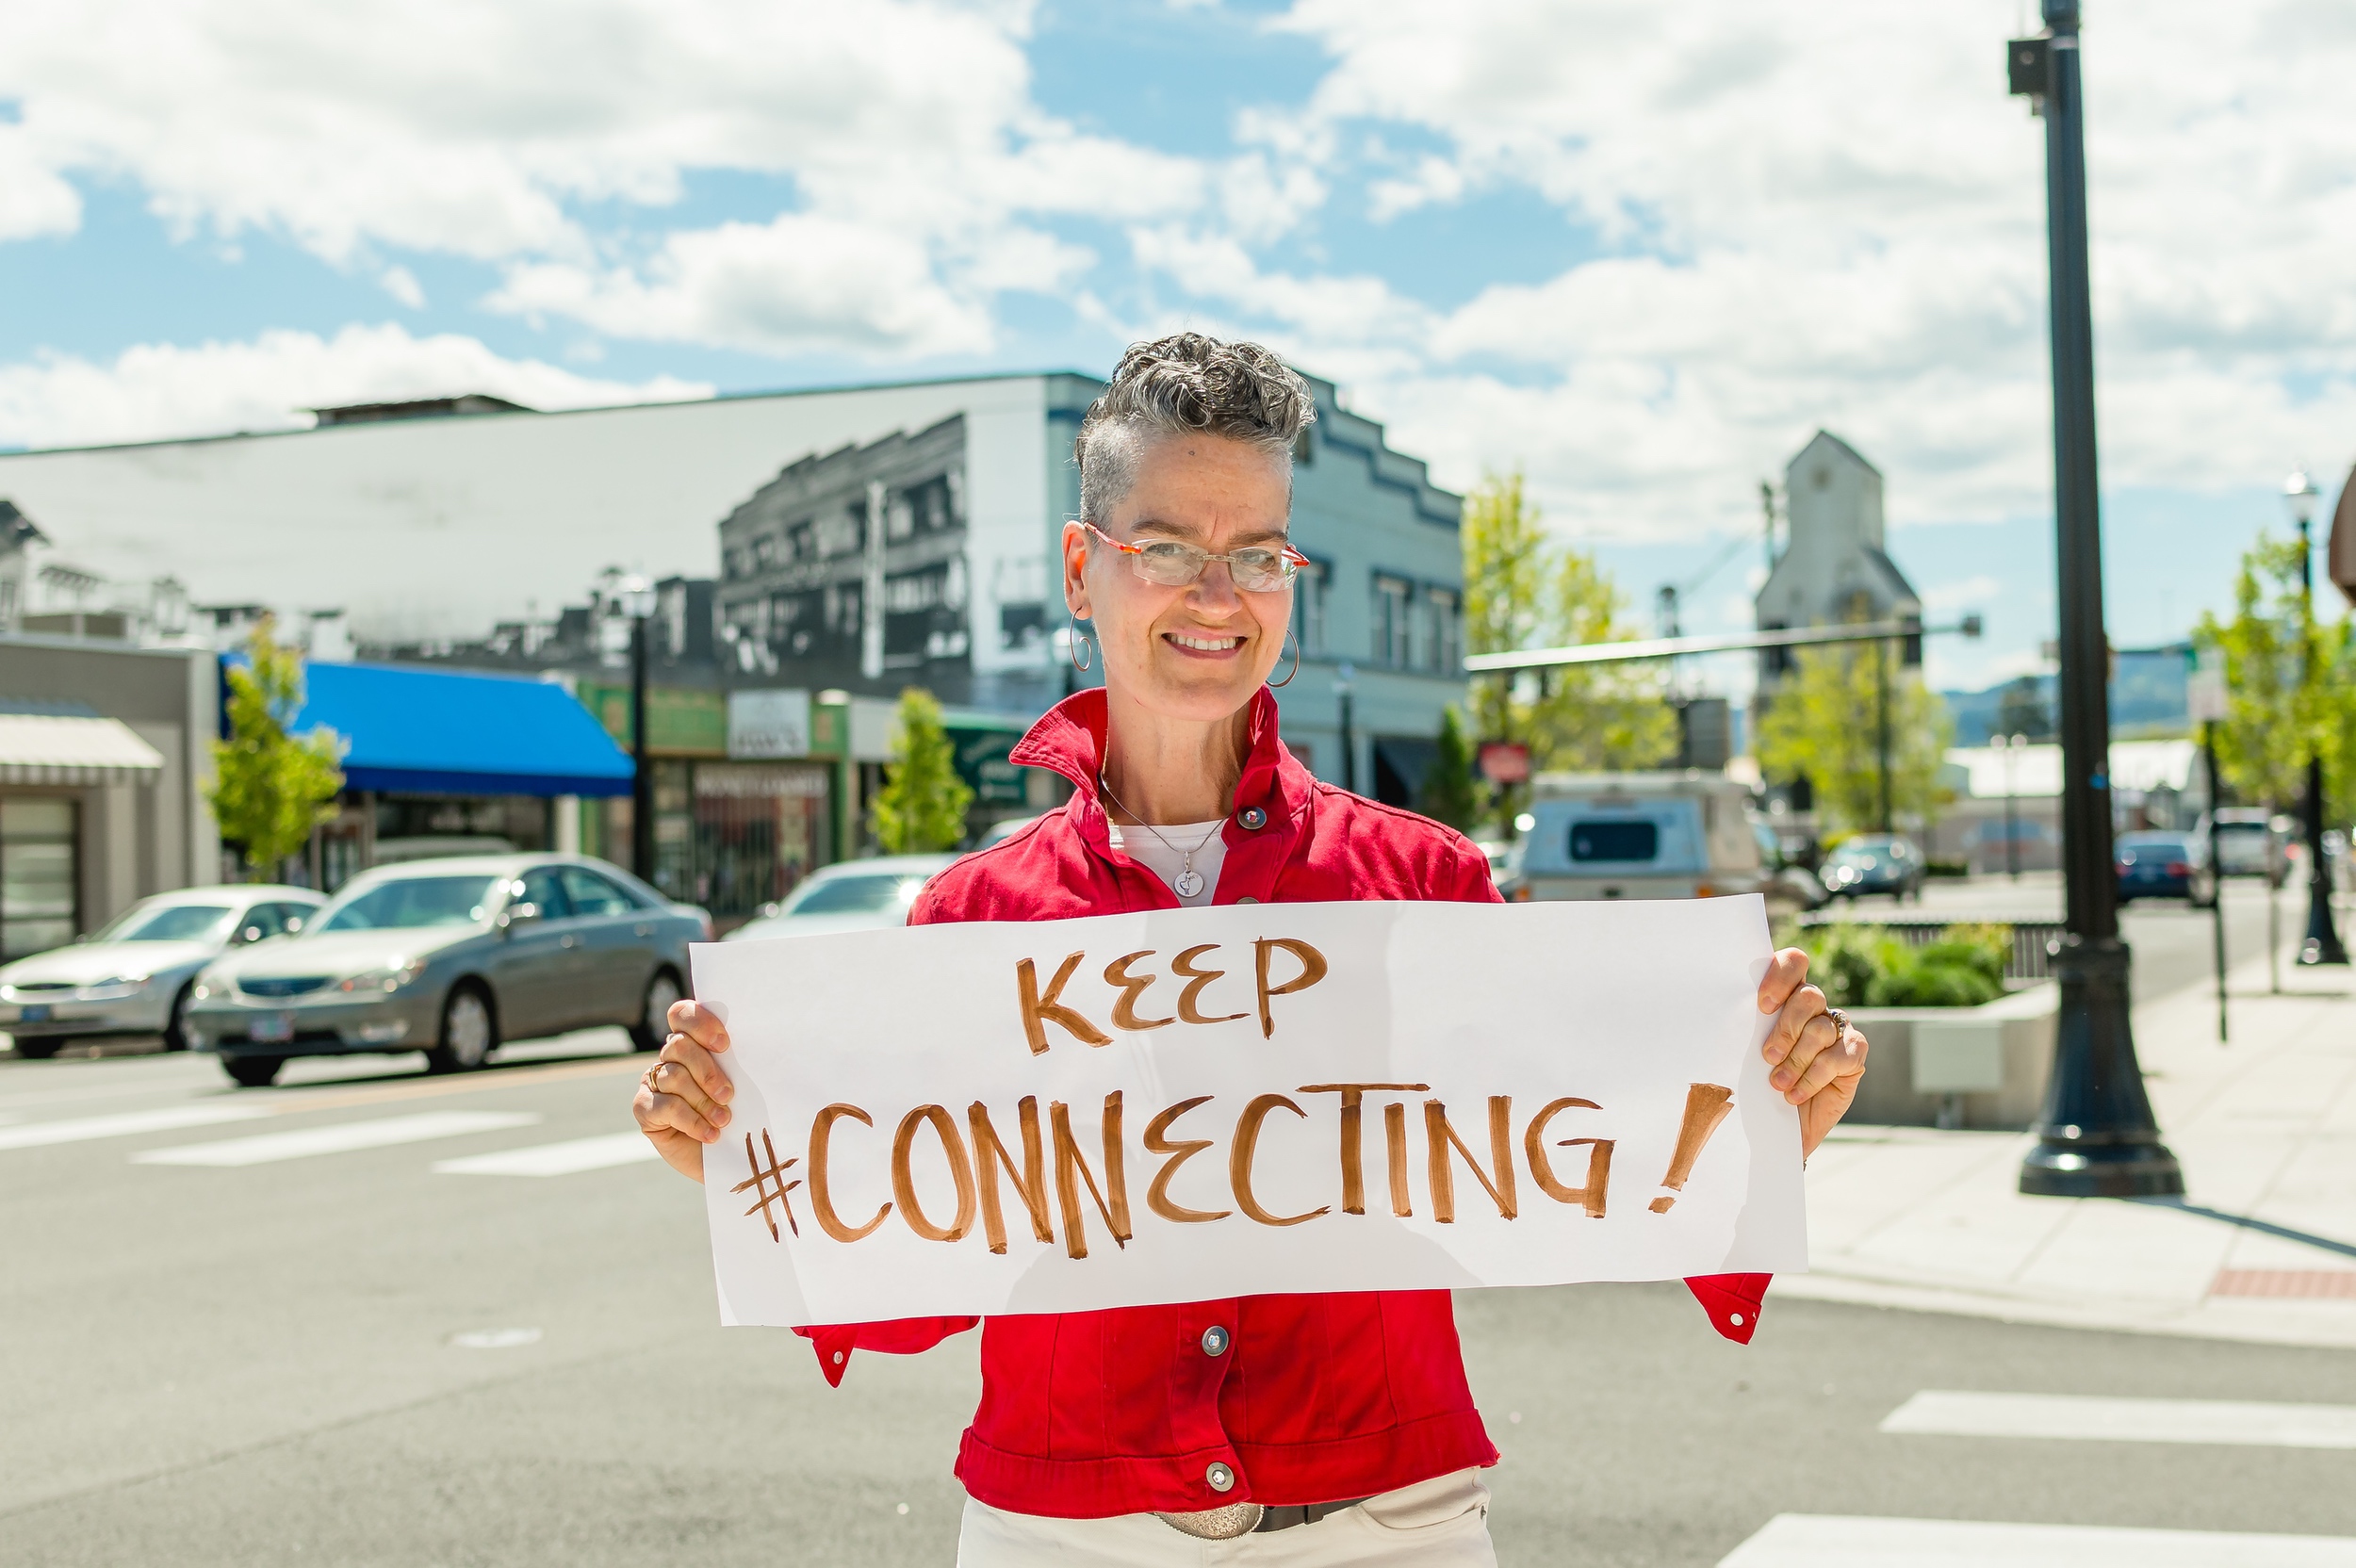 Ginger Johnson with sign, "Keep Connecting!"